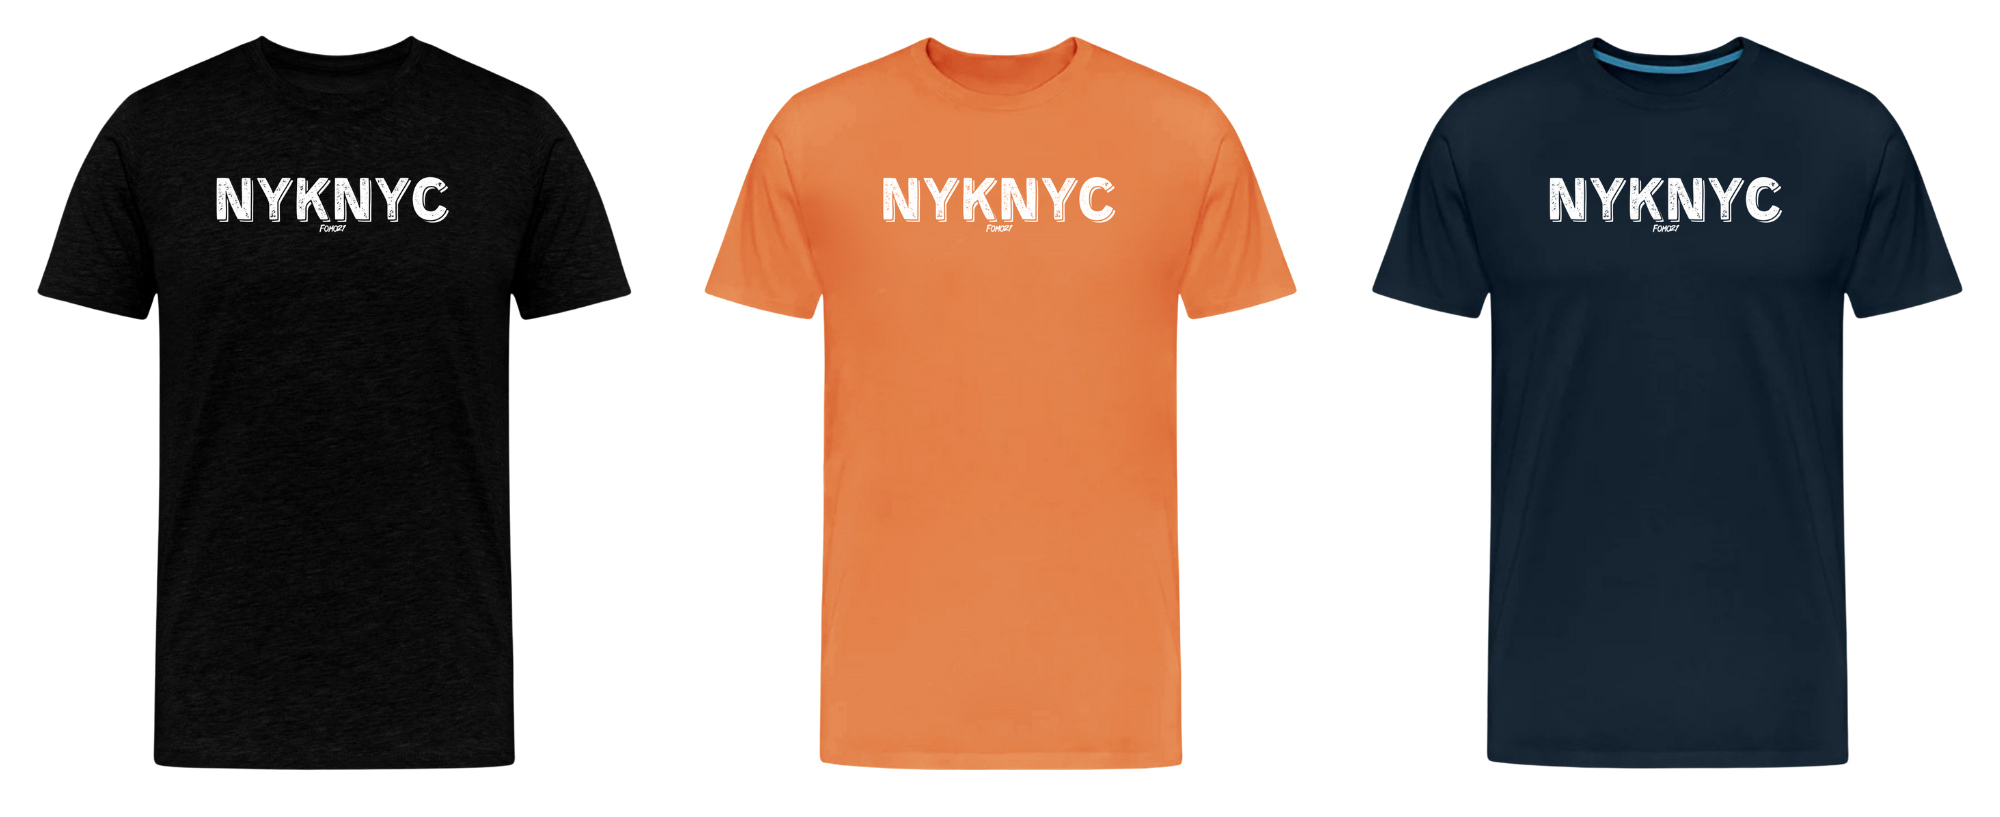 New NYKNYC Design at FOMO21: Your Go-To Place For Bitcoin Apparel